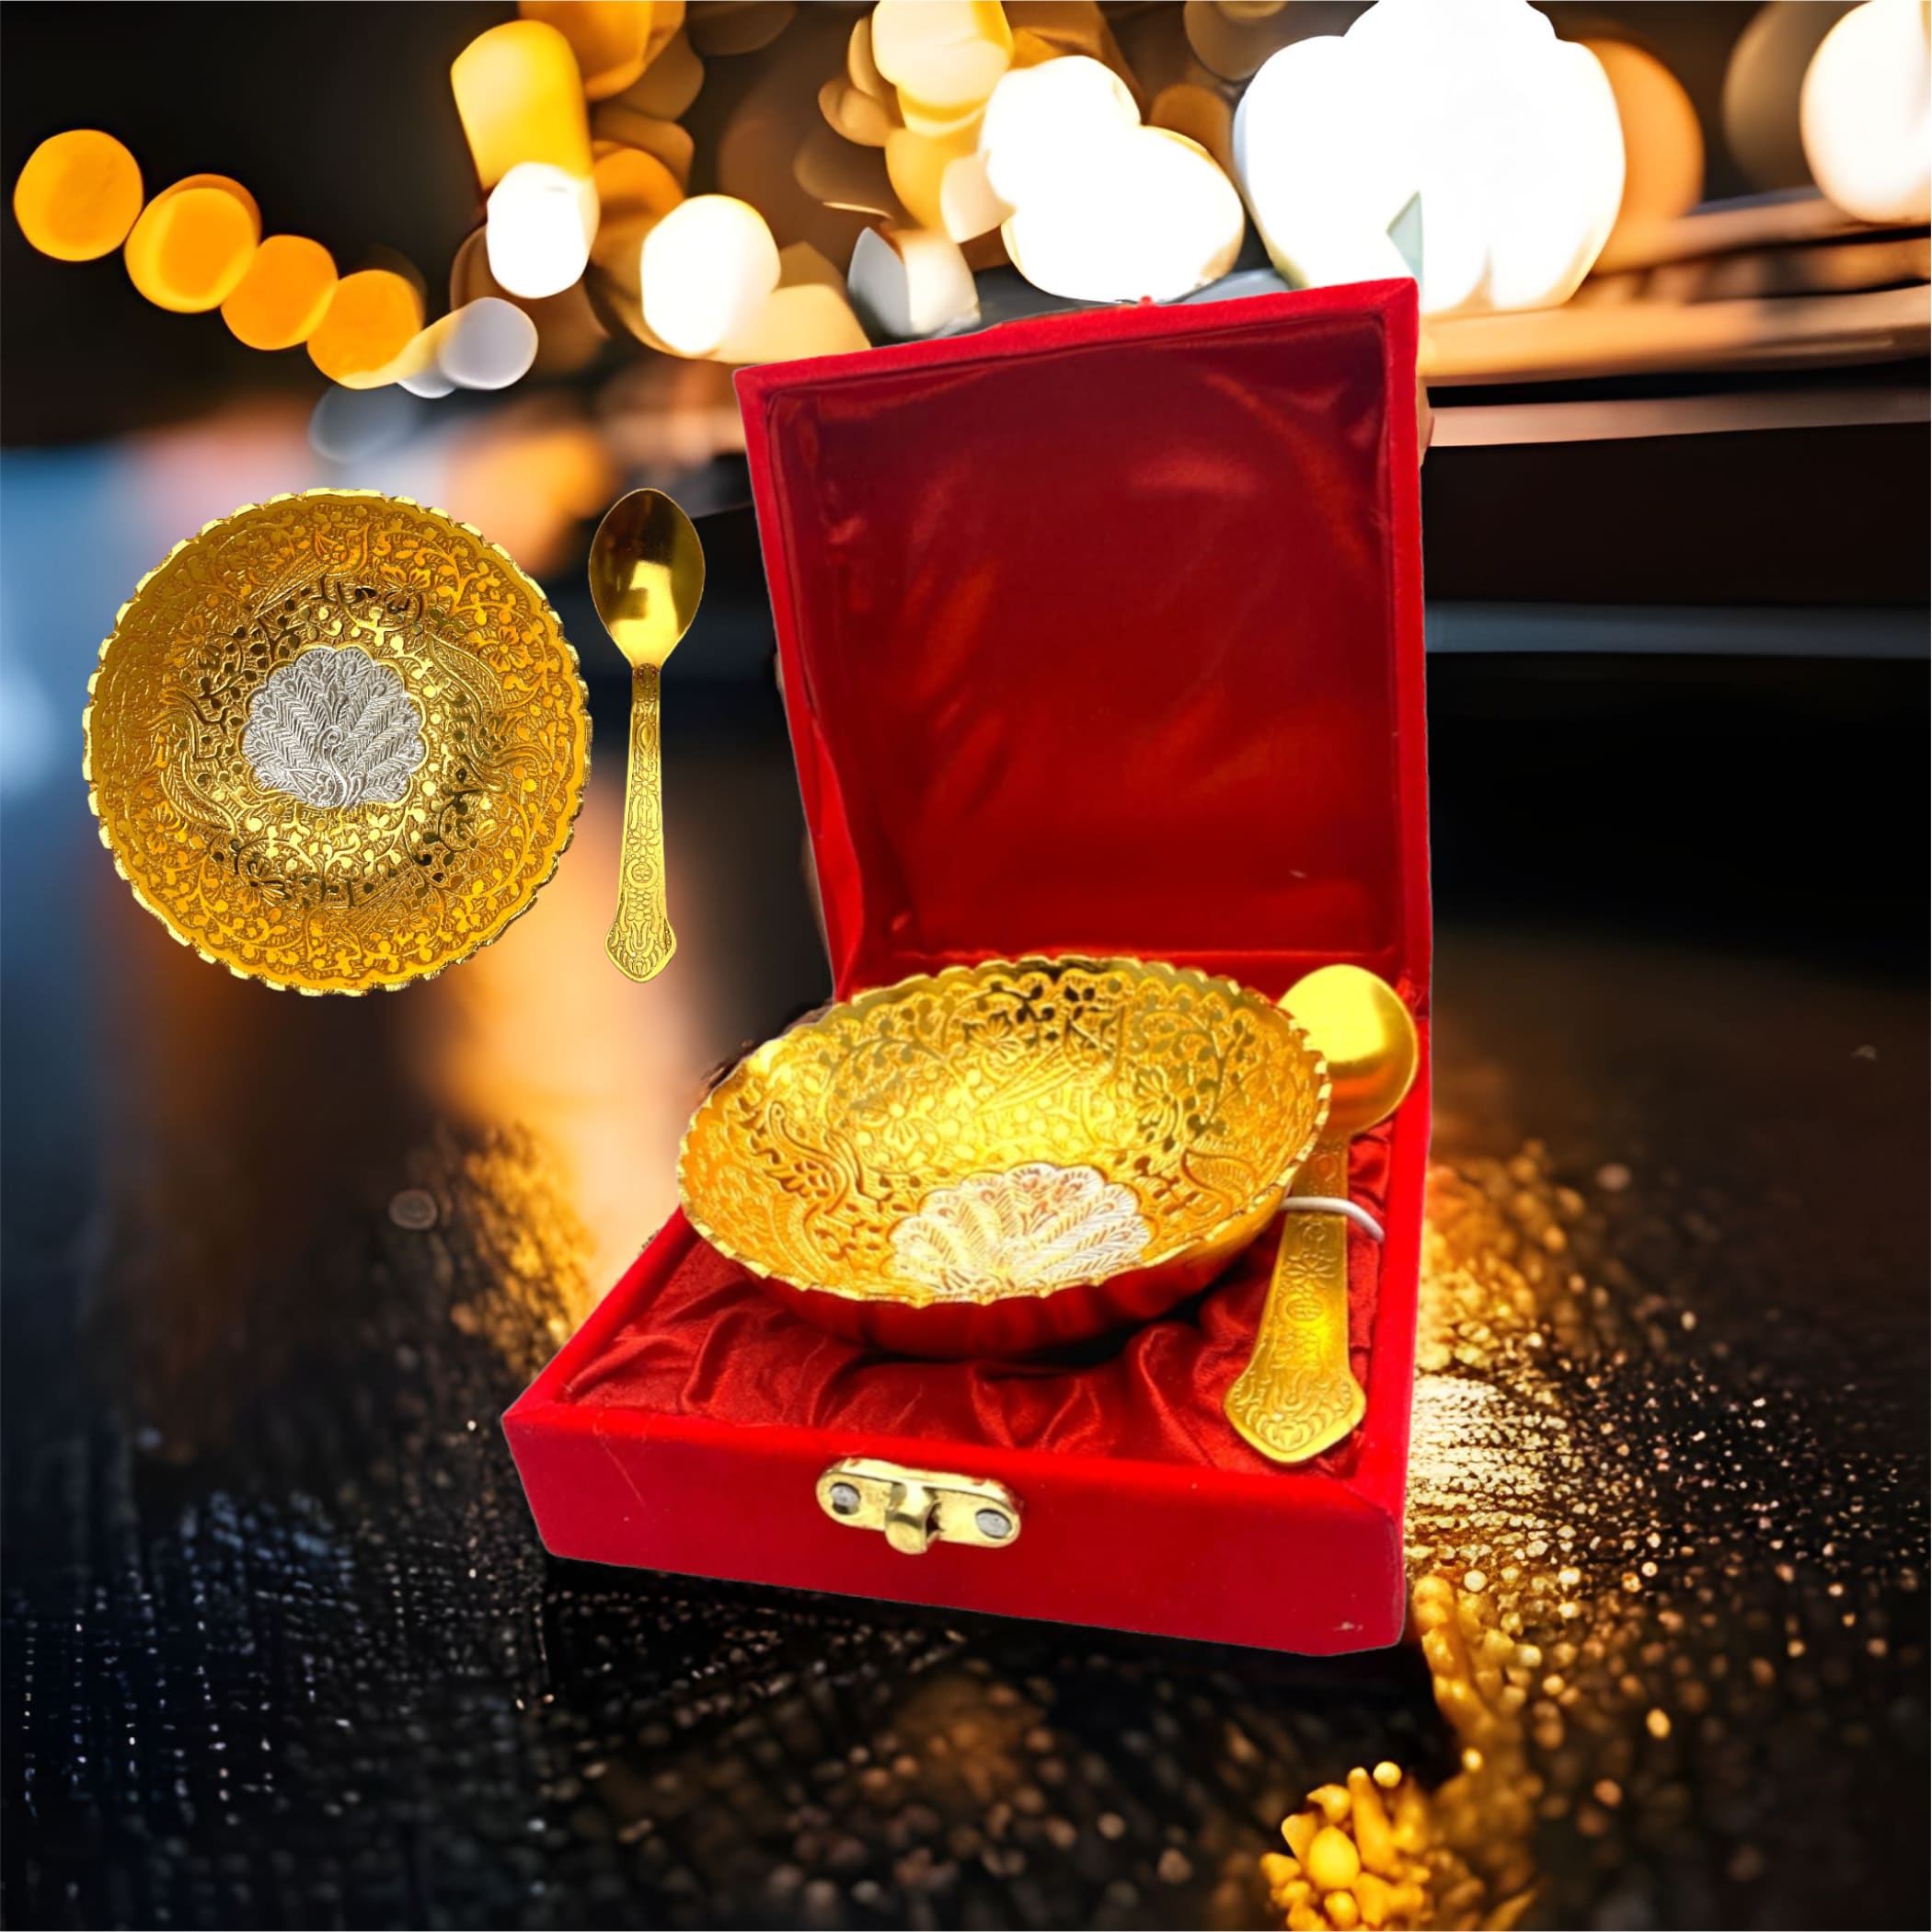 23 gift hampers to make your Diwali 2021 even more memorable